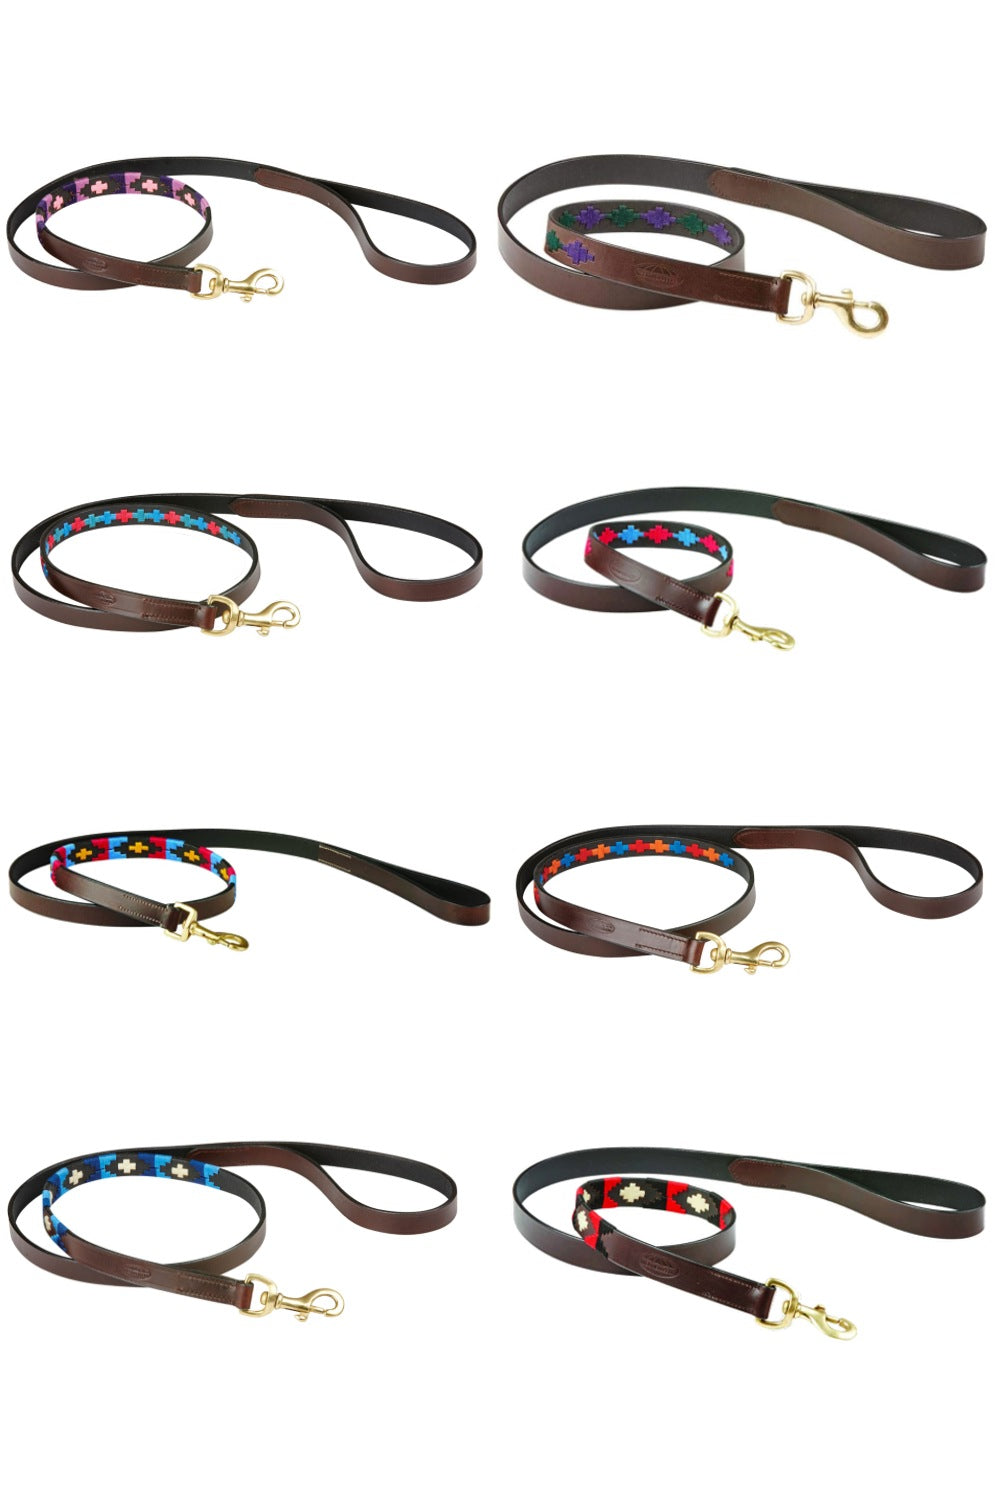 WeatherBeeta Polo Leather Dog Lead in Cowdray Brown/Black/Red/White, Beaufort Brown/Pink/Blue, Cowdray Brown/Pink/Blue/Yellow, Beaufort Brown/Purple/Teal, Beaufort Brown/Emerald/Pink/Blue, Beaufort Brown/Red/Orange/Blue, Cowdray Brown/Blue/Blue, Cowdray Brown/Purple/Purple